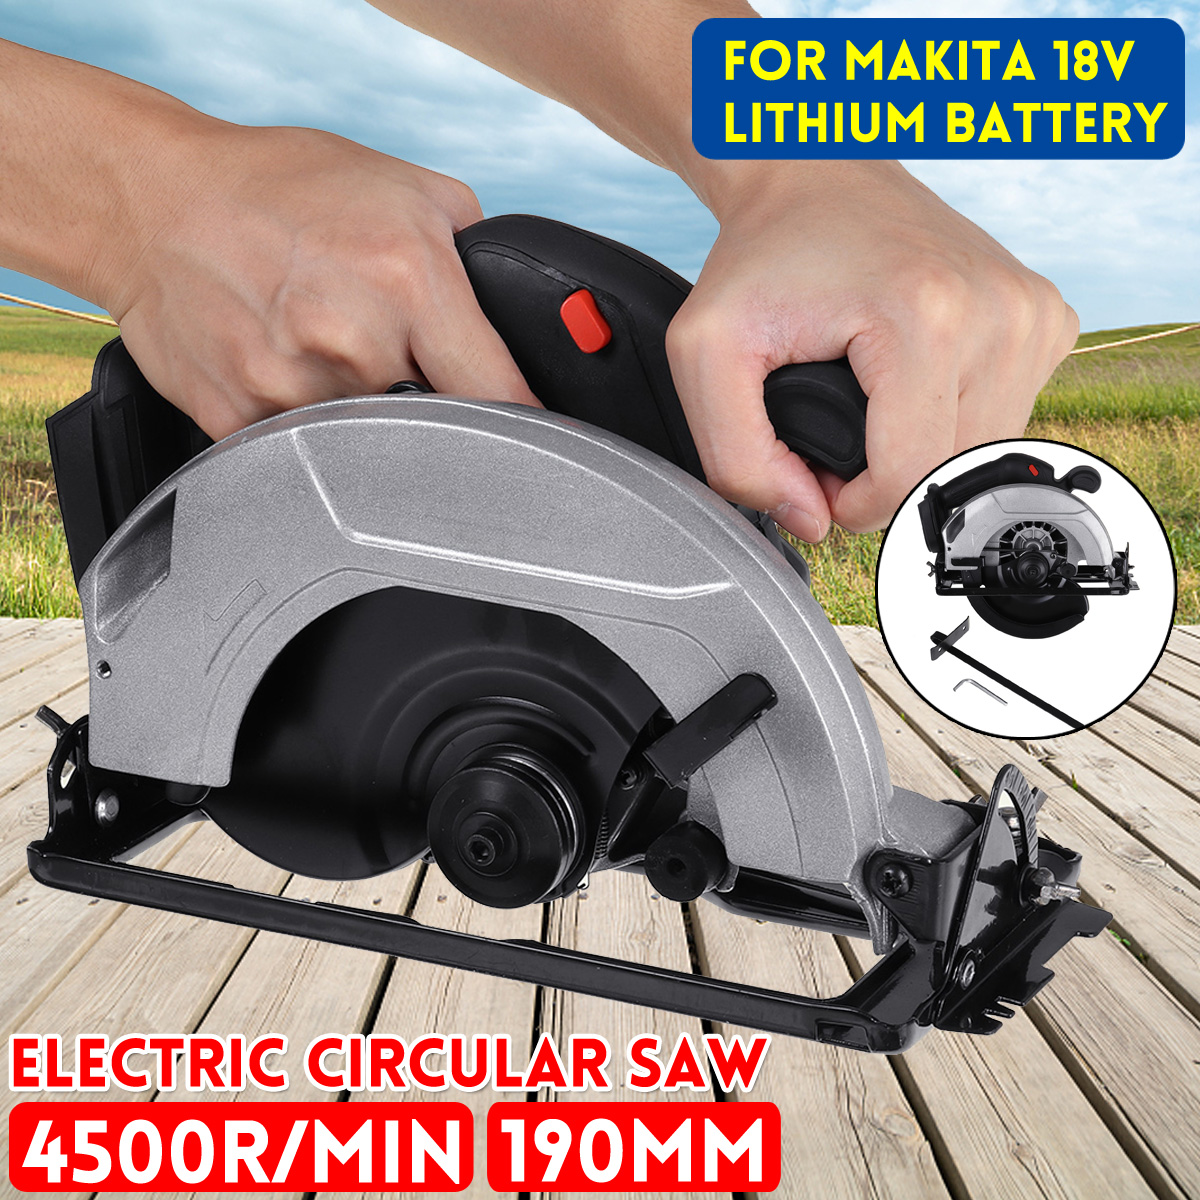 Drillpro-190mm-Electric-Laser-Circular-Saw-Corded-Cutting-Tool-For-Makita-18V-Lithium-Battery-1734554-1